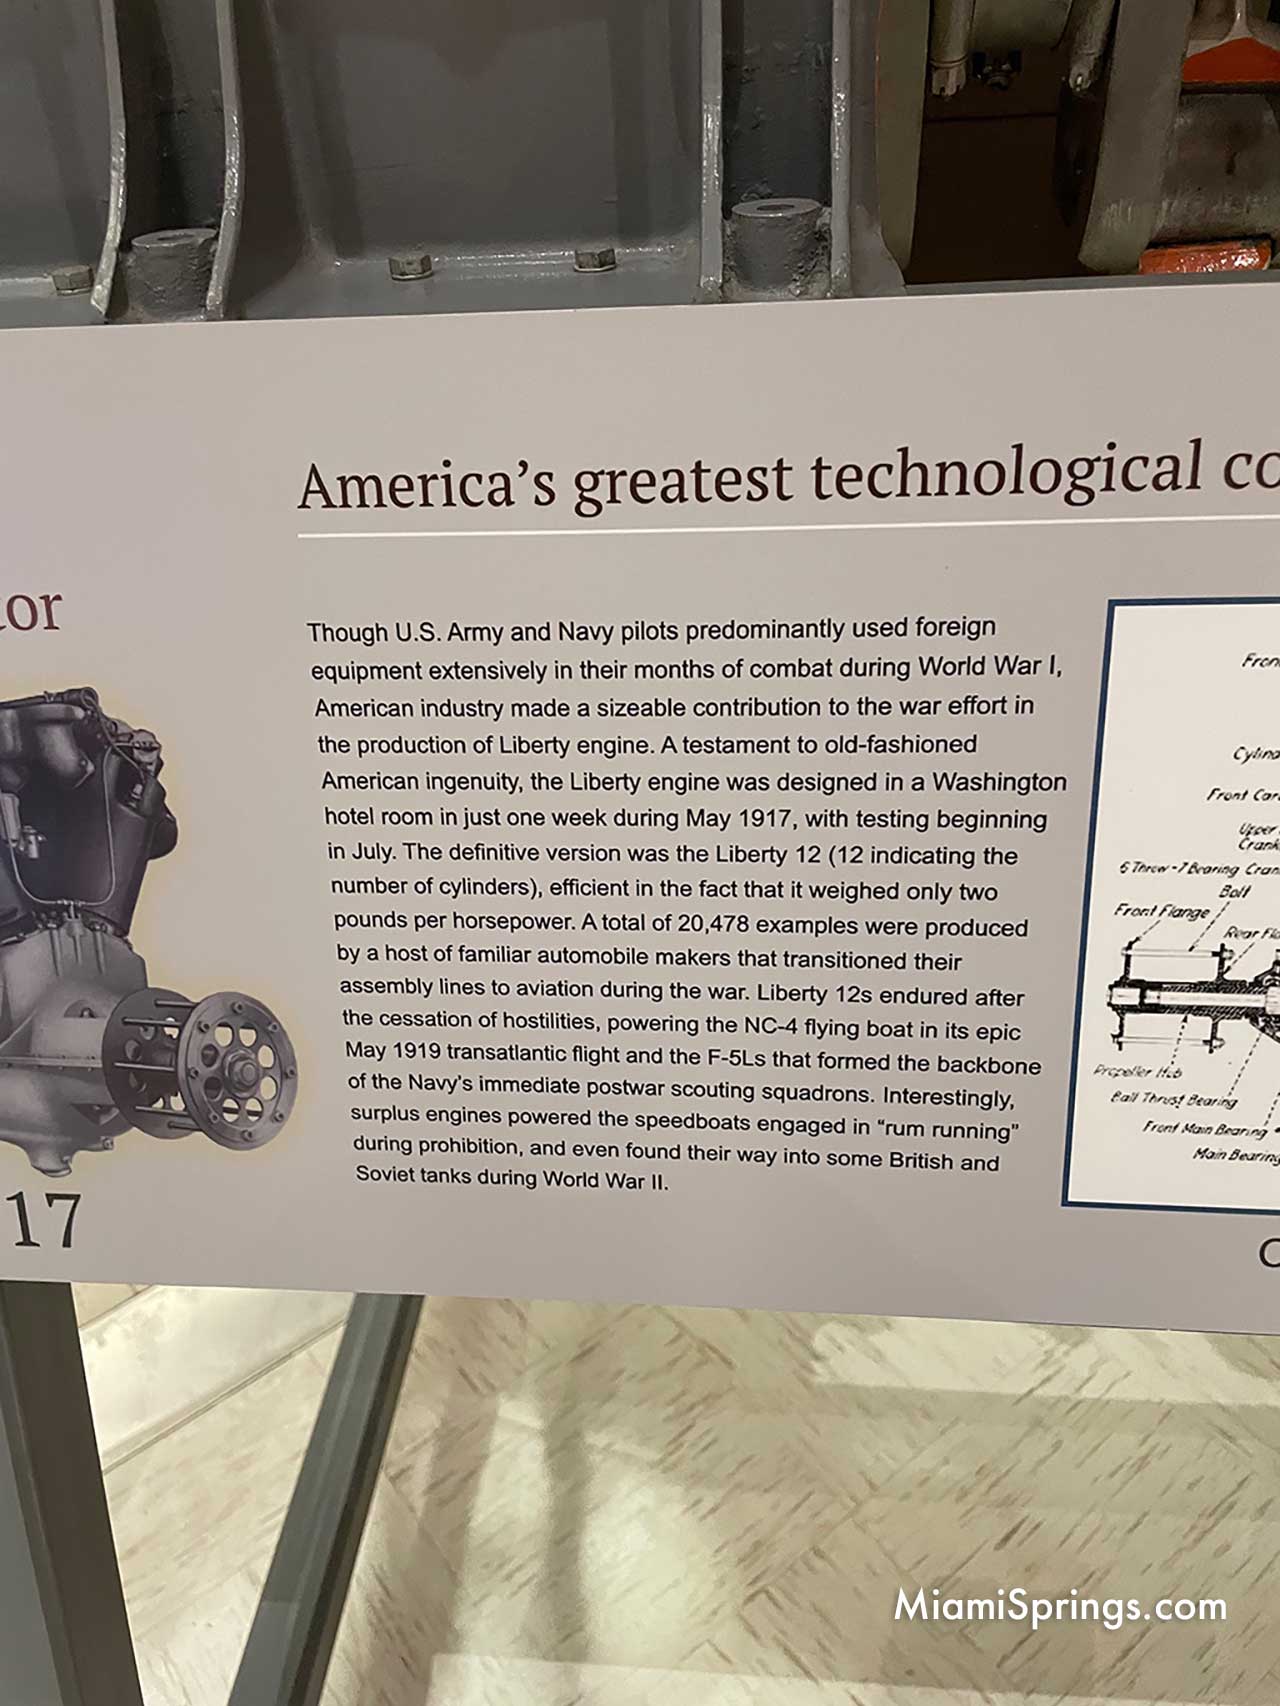 The Curtiss Liberty 12 Motor from 1917 at the National Naval Aviation Museum in Pensacola, Florida